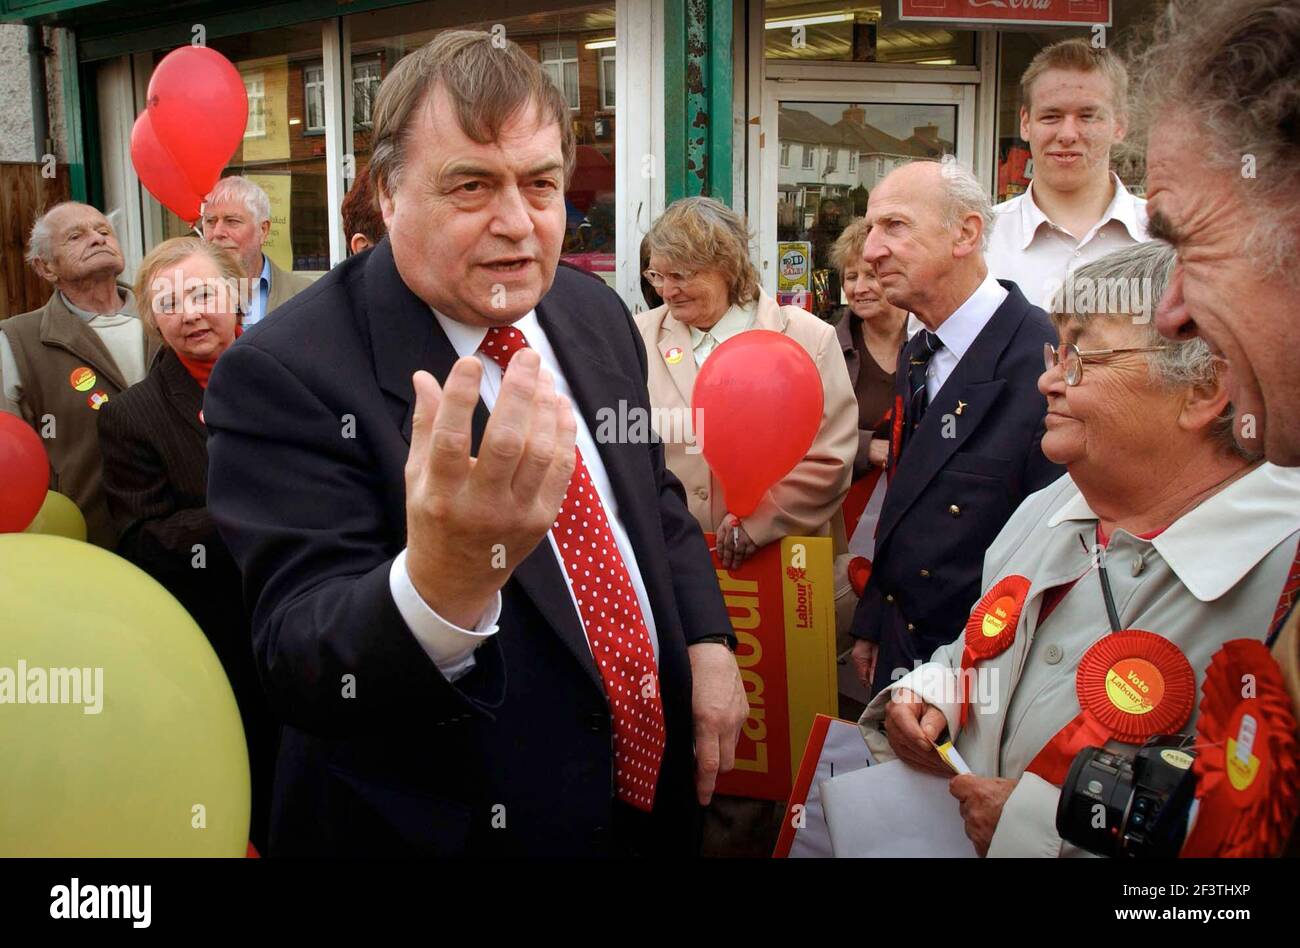 THE DEPT PRIME MINISTER FIRES UP LOCAL PARTY SUPPORTERS AGAINST VOTER APATHY IN FOLKESTONE AS THE PRESCOTT EXPRESS ROLLS THROUGH KENT,ON THE DAY BLAIR ANNOUNCED THE DATE OF THE GENERAL ELECTION TO BE 5 May 2005 .TOM PILSTON Stock Photo